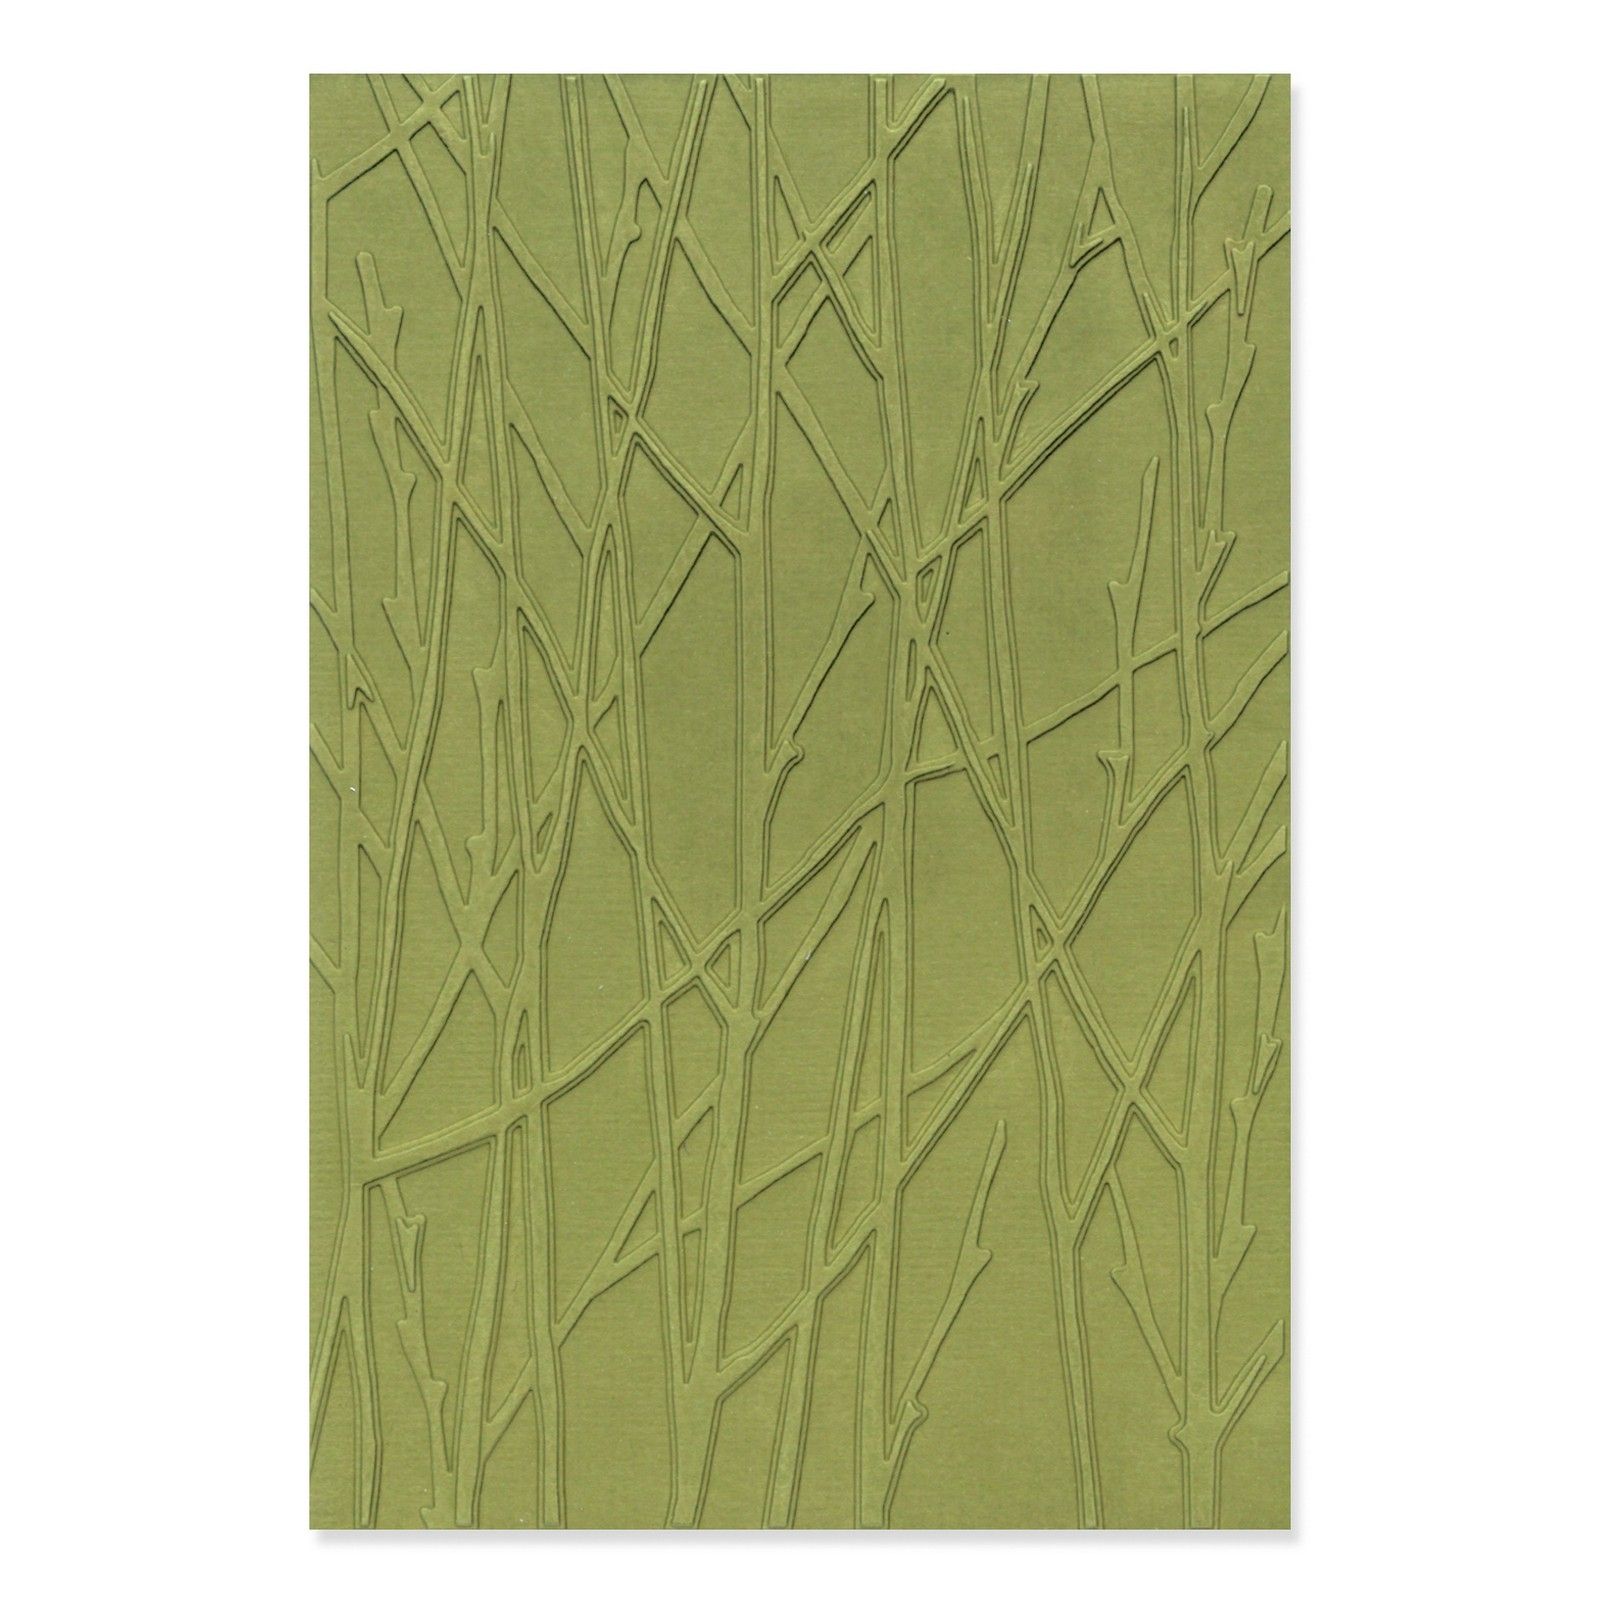 Sizzix • Multi-Level Textured Impressions Embossing Folder Forest Scene by Olivia Rose